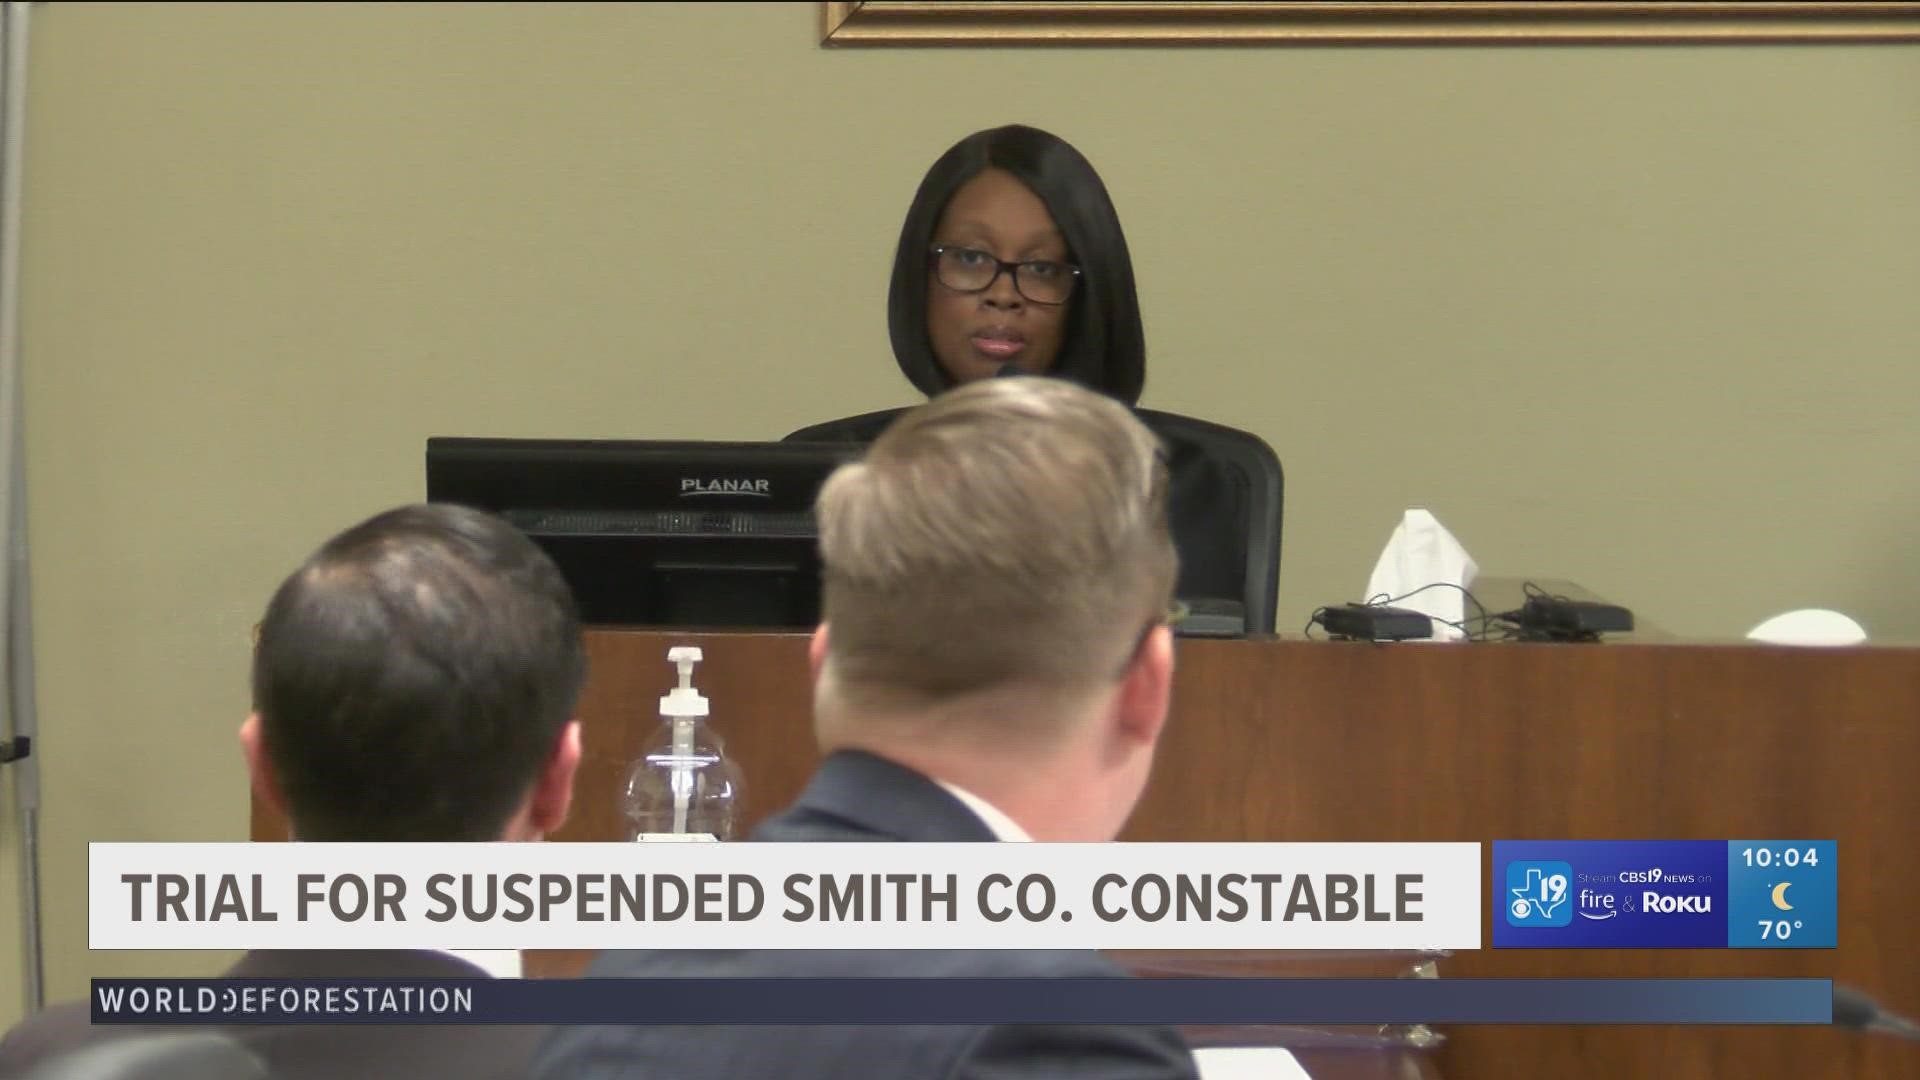 "I was forced to do it, if I would've said 'no' I would've most likely gotten fired," said LaQuenda Banks, former Smith County Pct. 1 Chief Deputy.